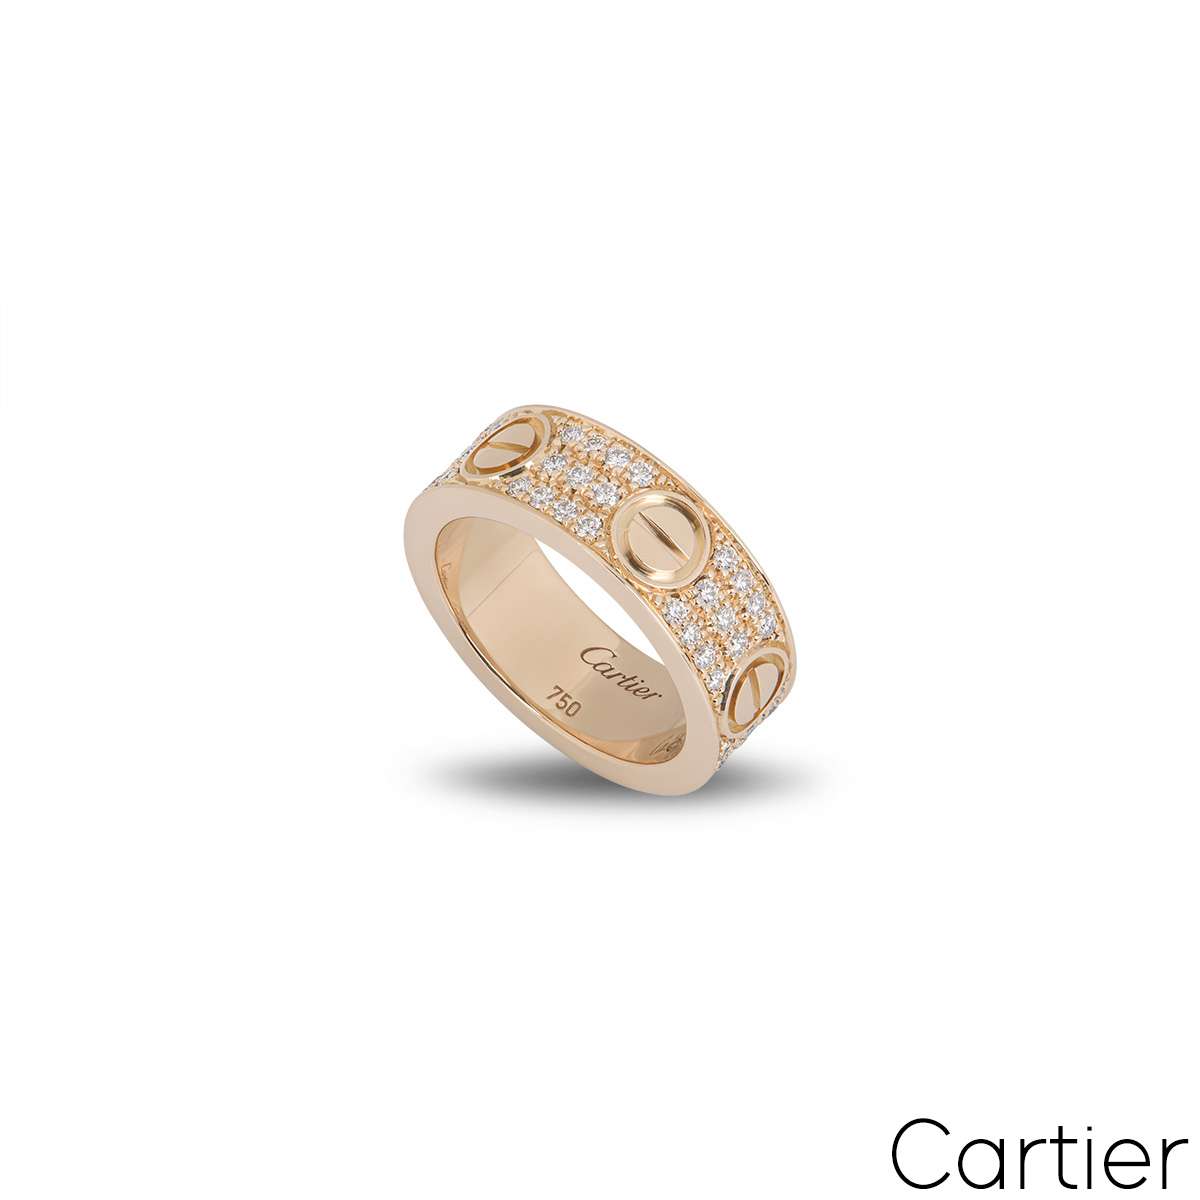 cartier ring dimensions